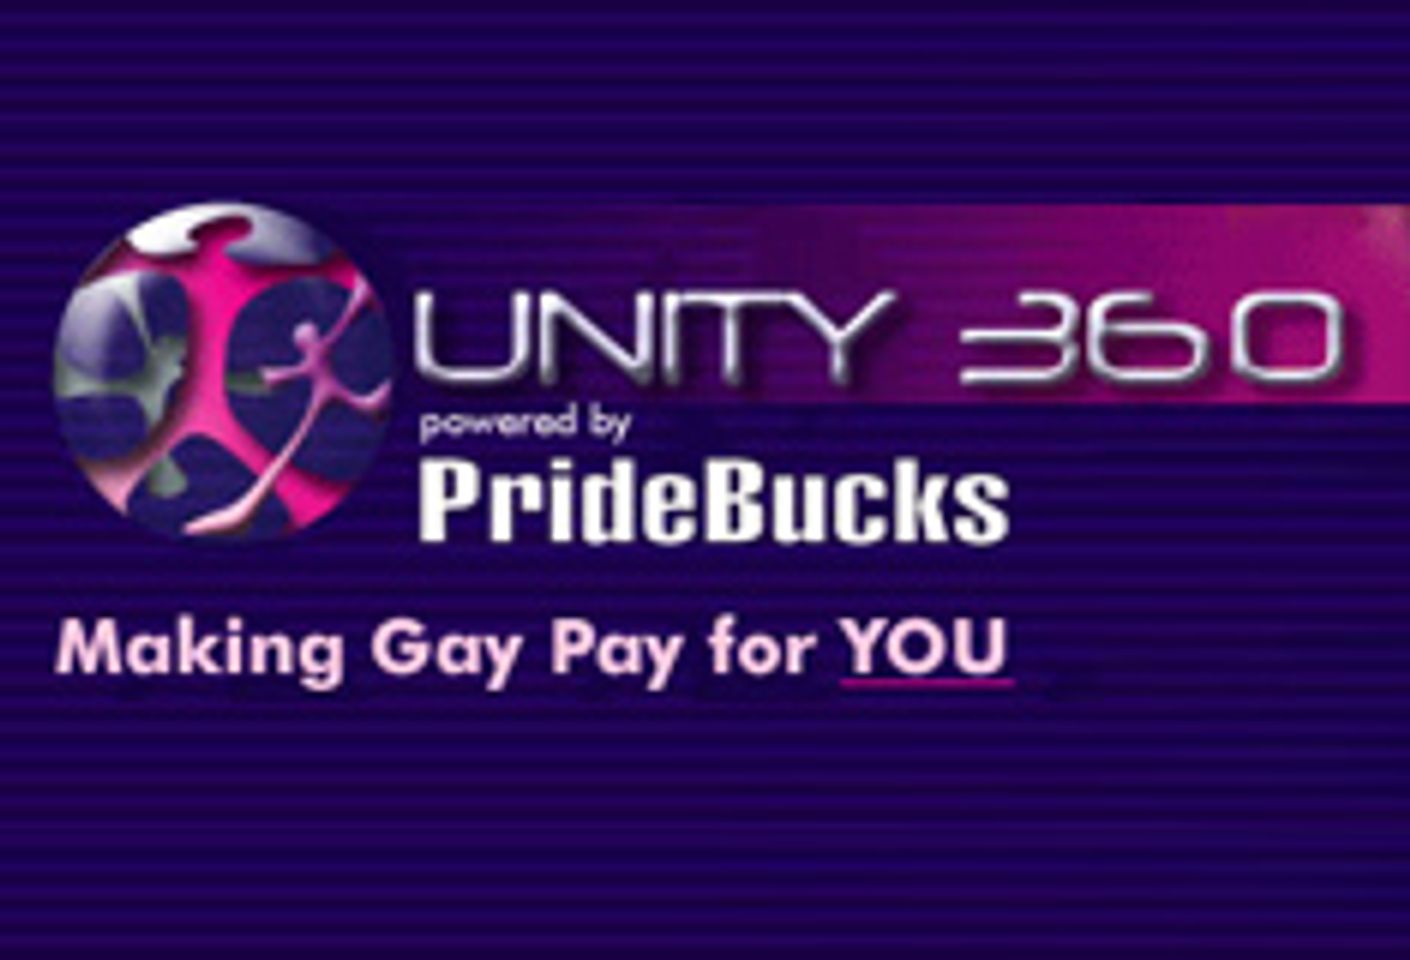 Gay Webmaster Community Unity360 Giving Away Free Gas